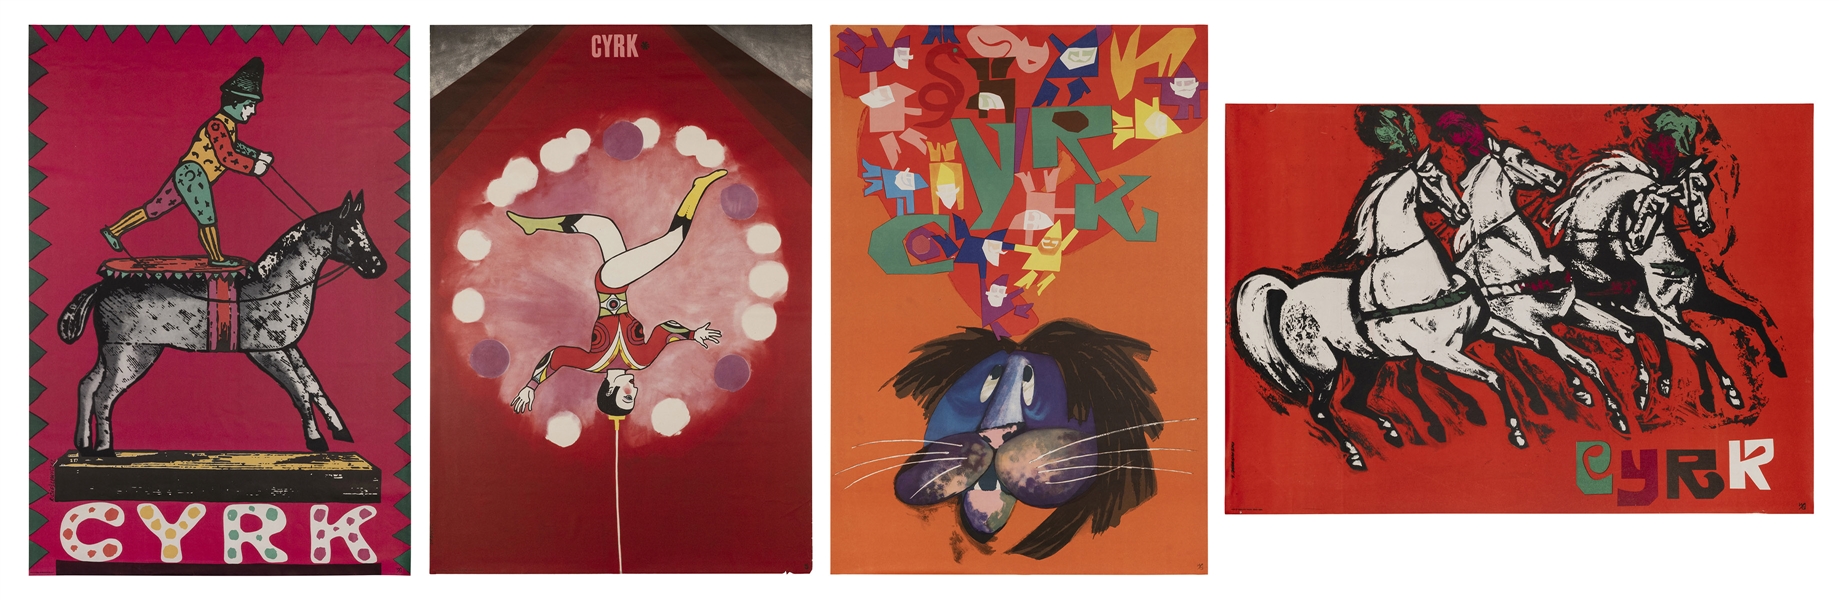  [VARIOUS DESIGNERS] Cyrk. Lot of 4 Posters. Poland, 1960s/7...